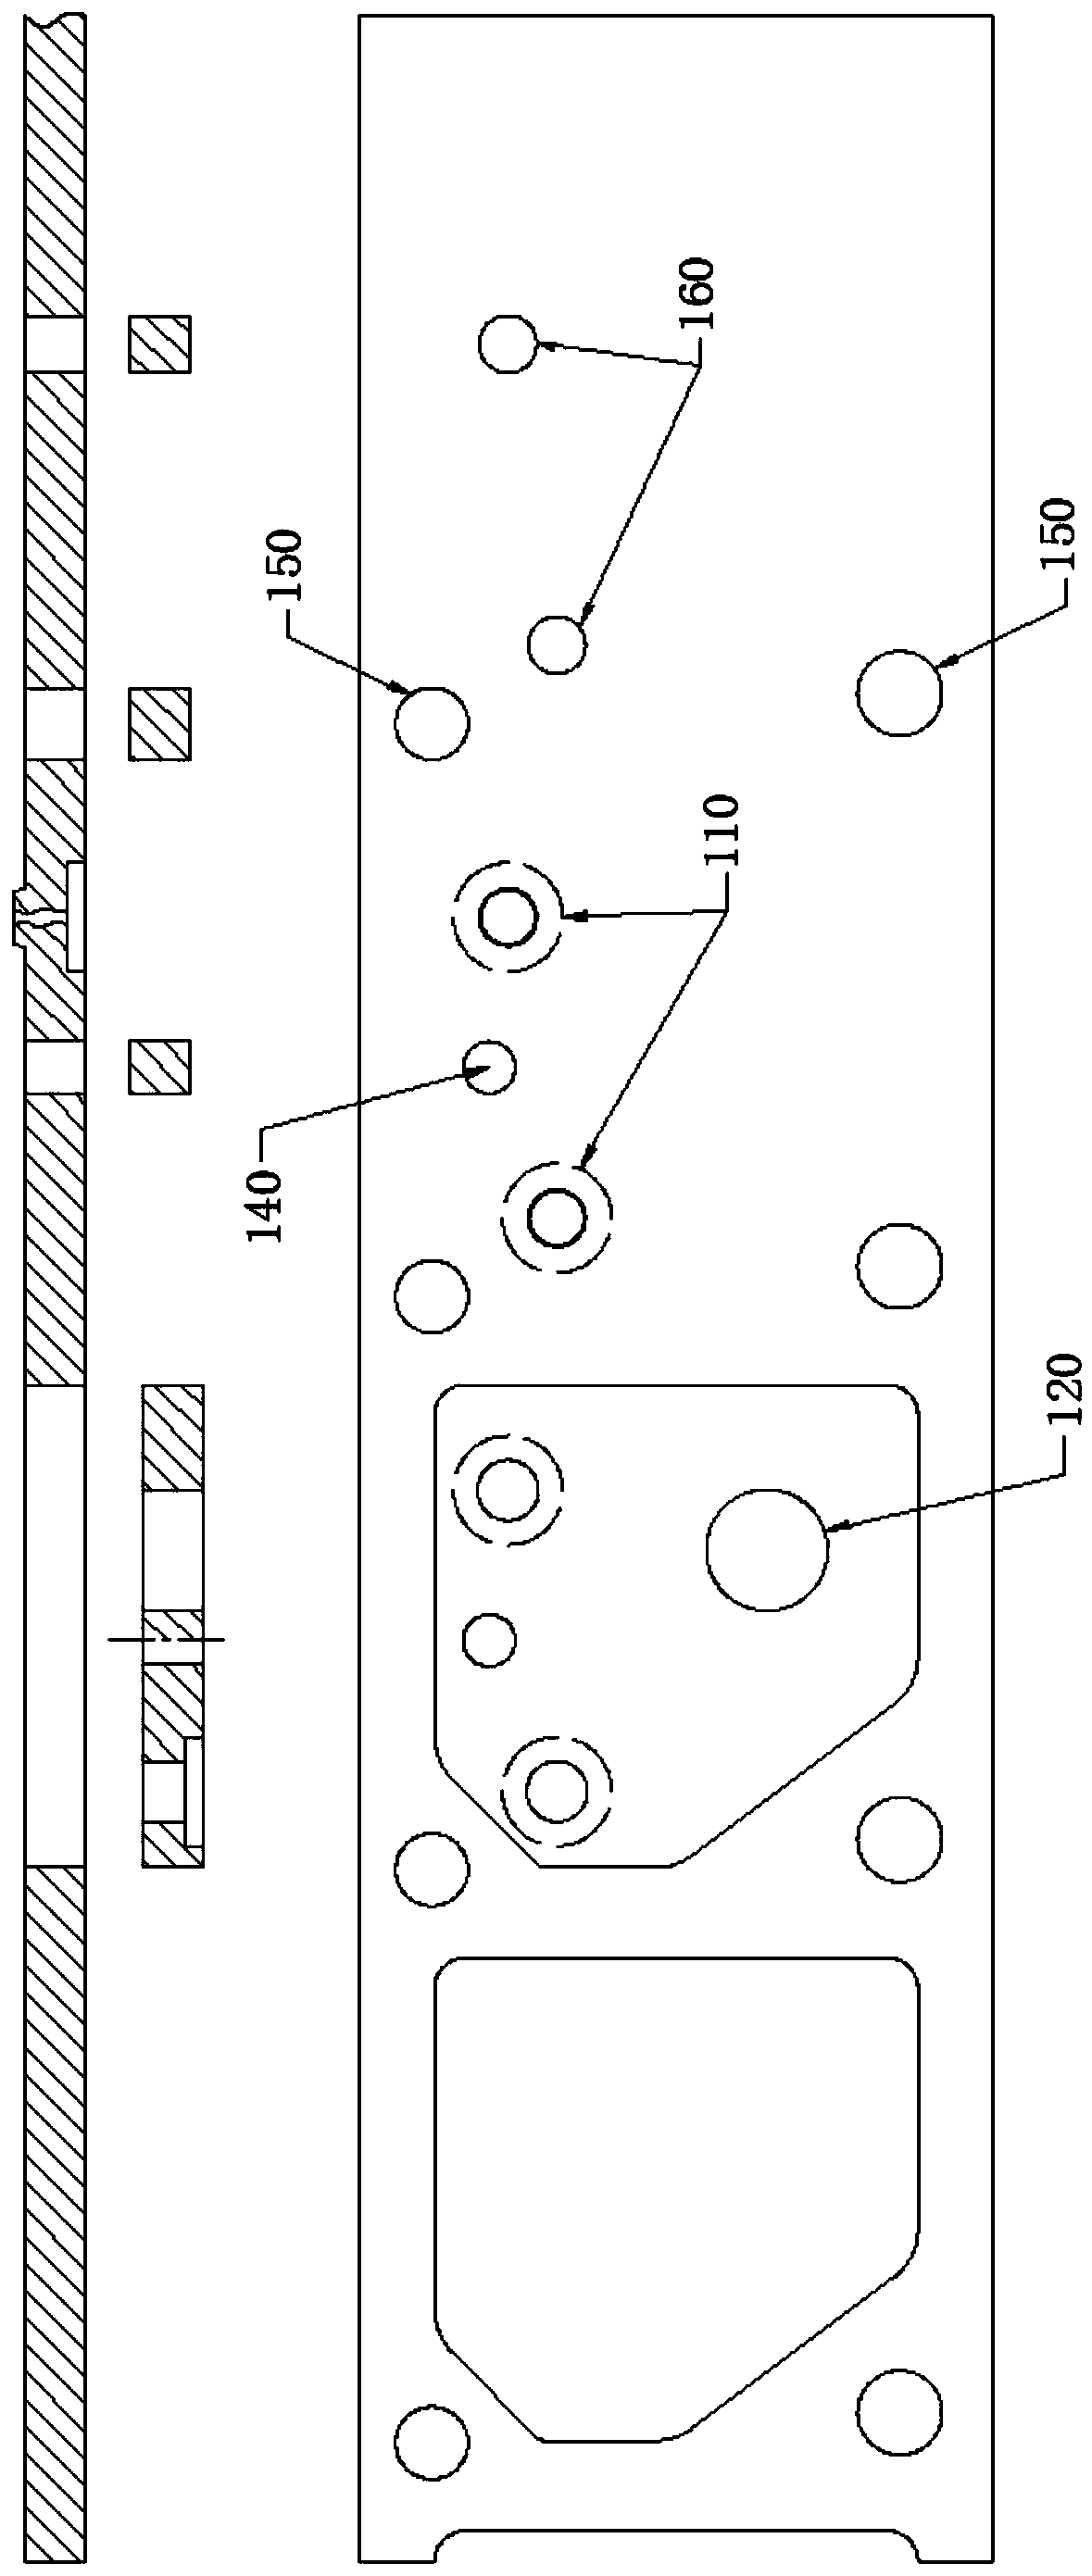 A method for forming low-strength thick plate fine-blanking parts with countersunk holes and slender blind holes